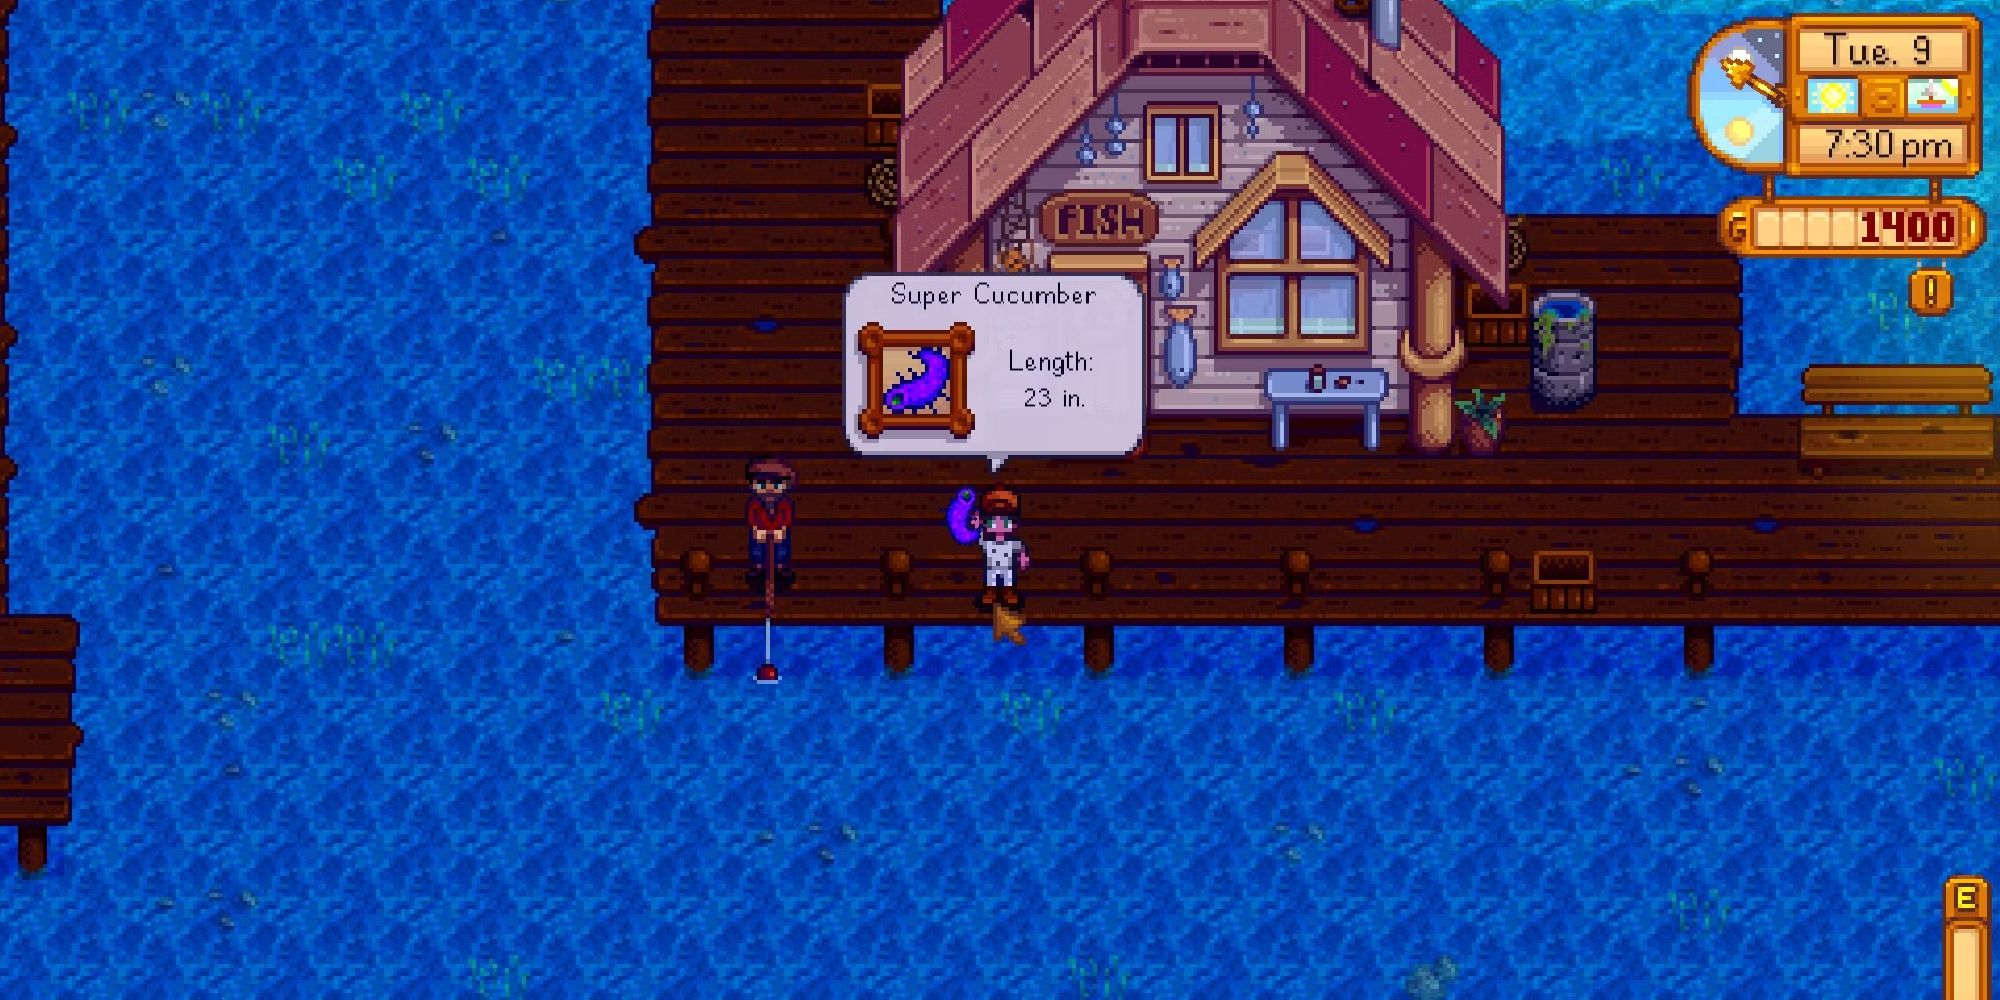 stardew valley player catching a sea cucumber